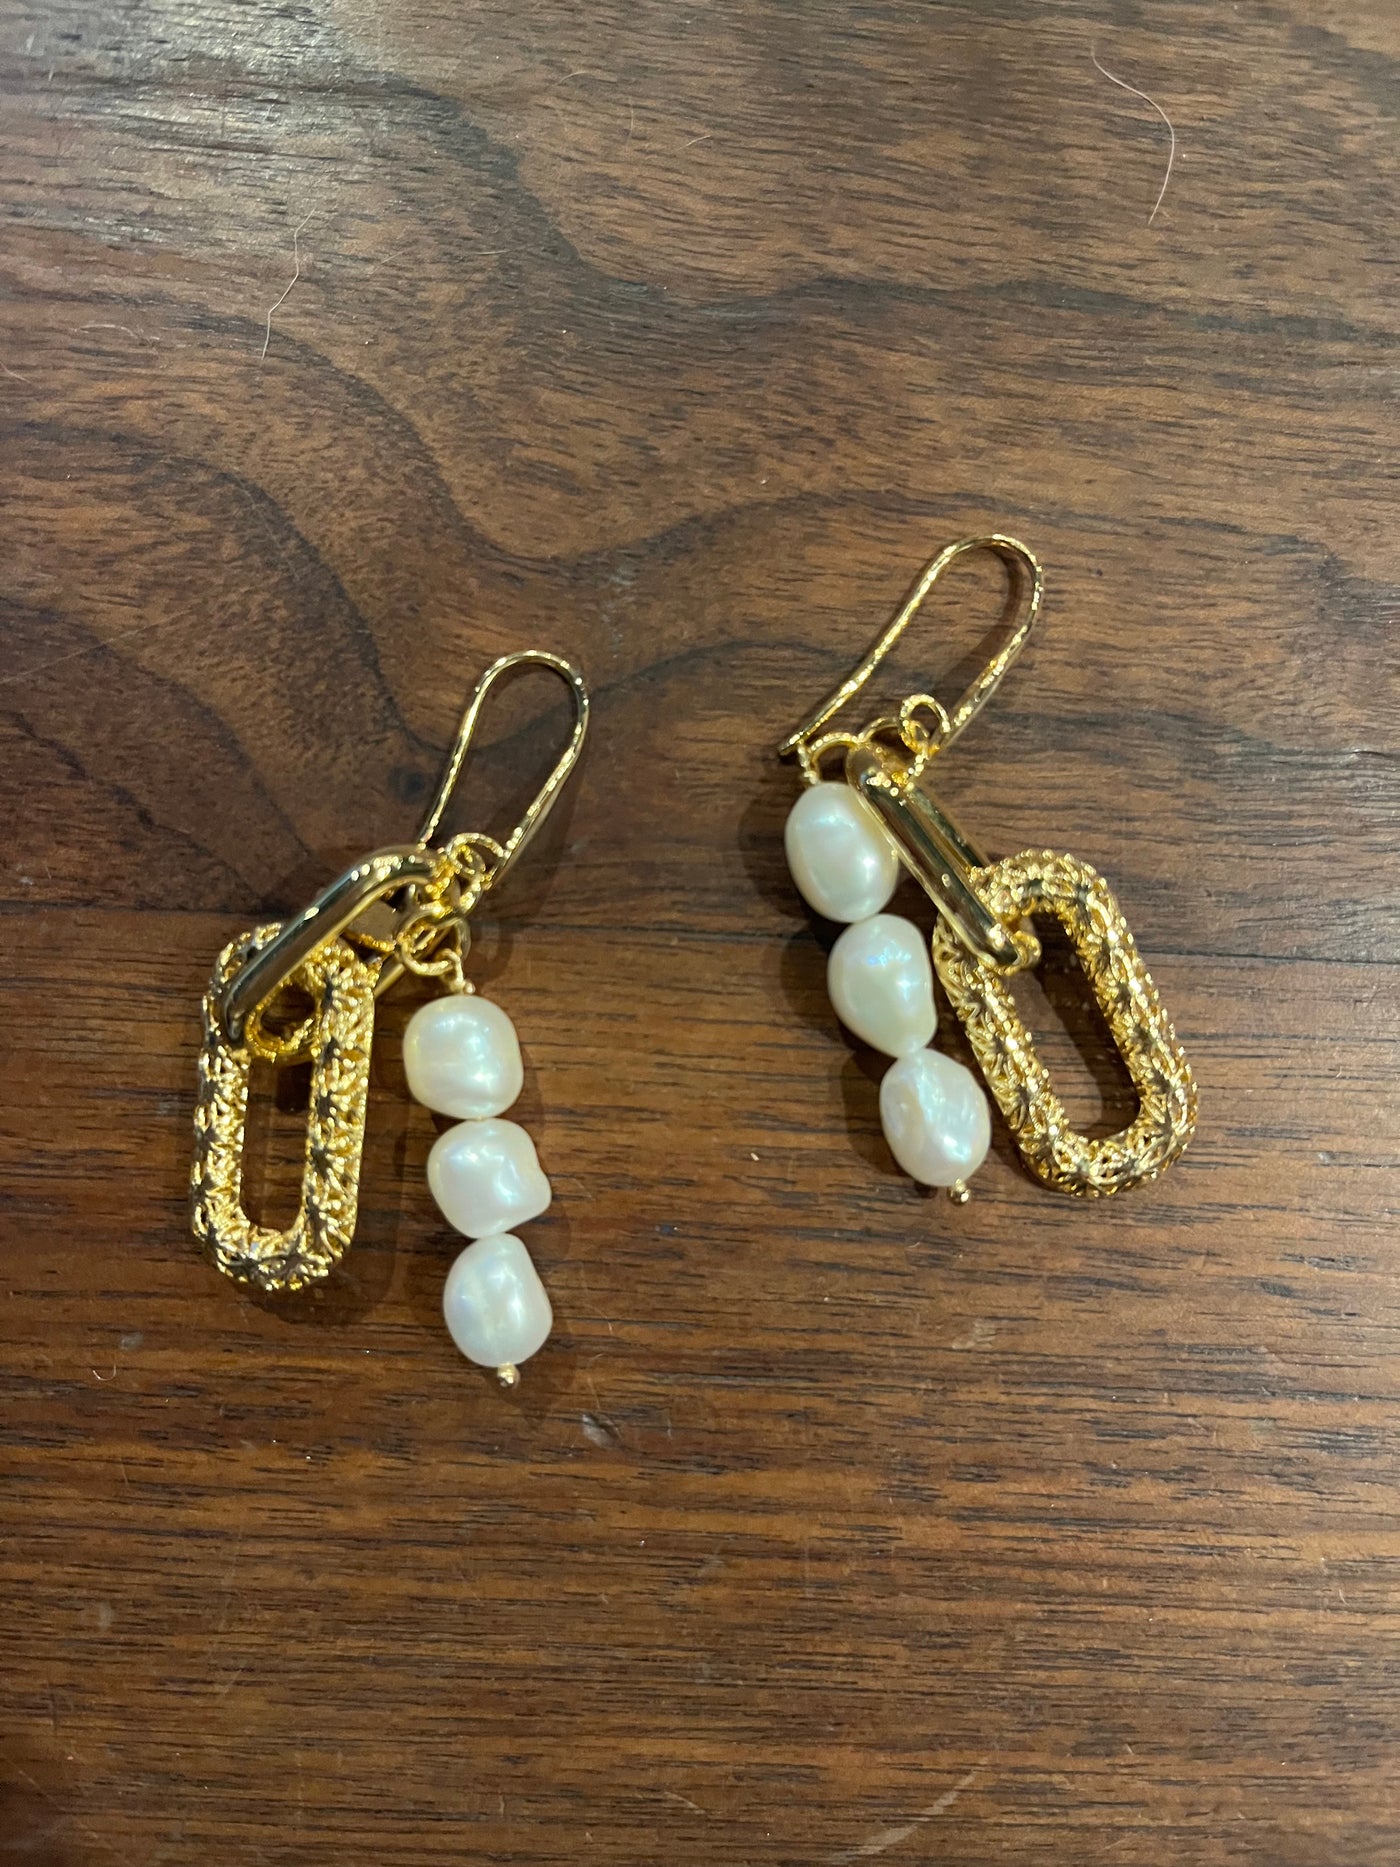 Chain Pearl Earrings from Maison Irem available at Saint Claude Social Club.